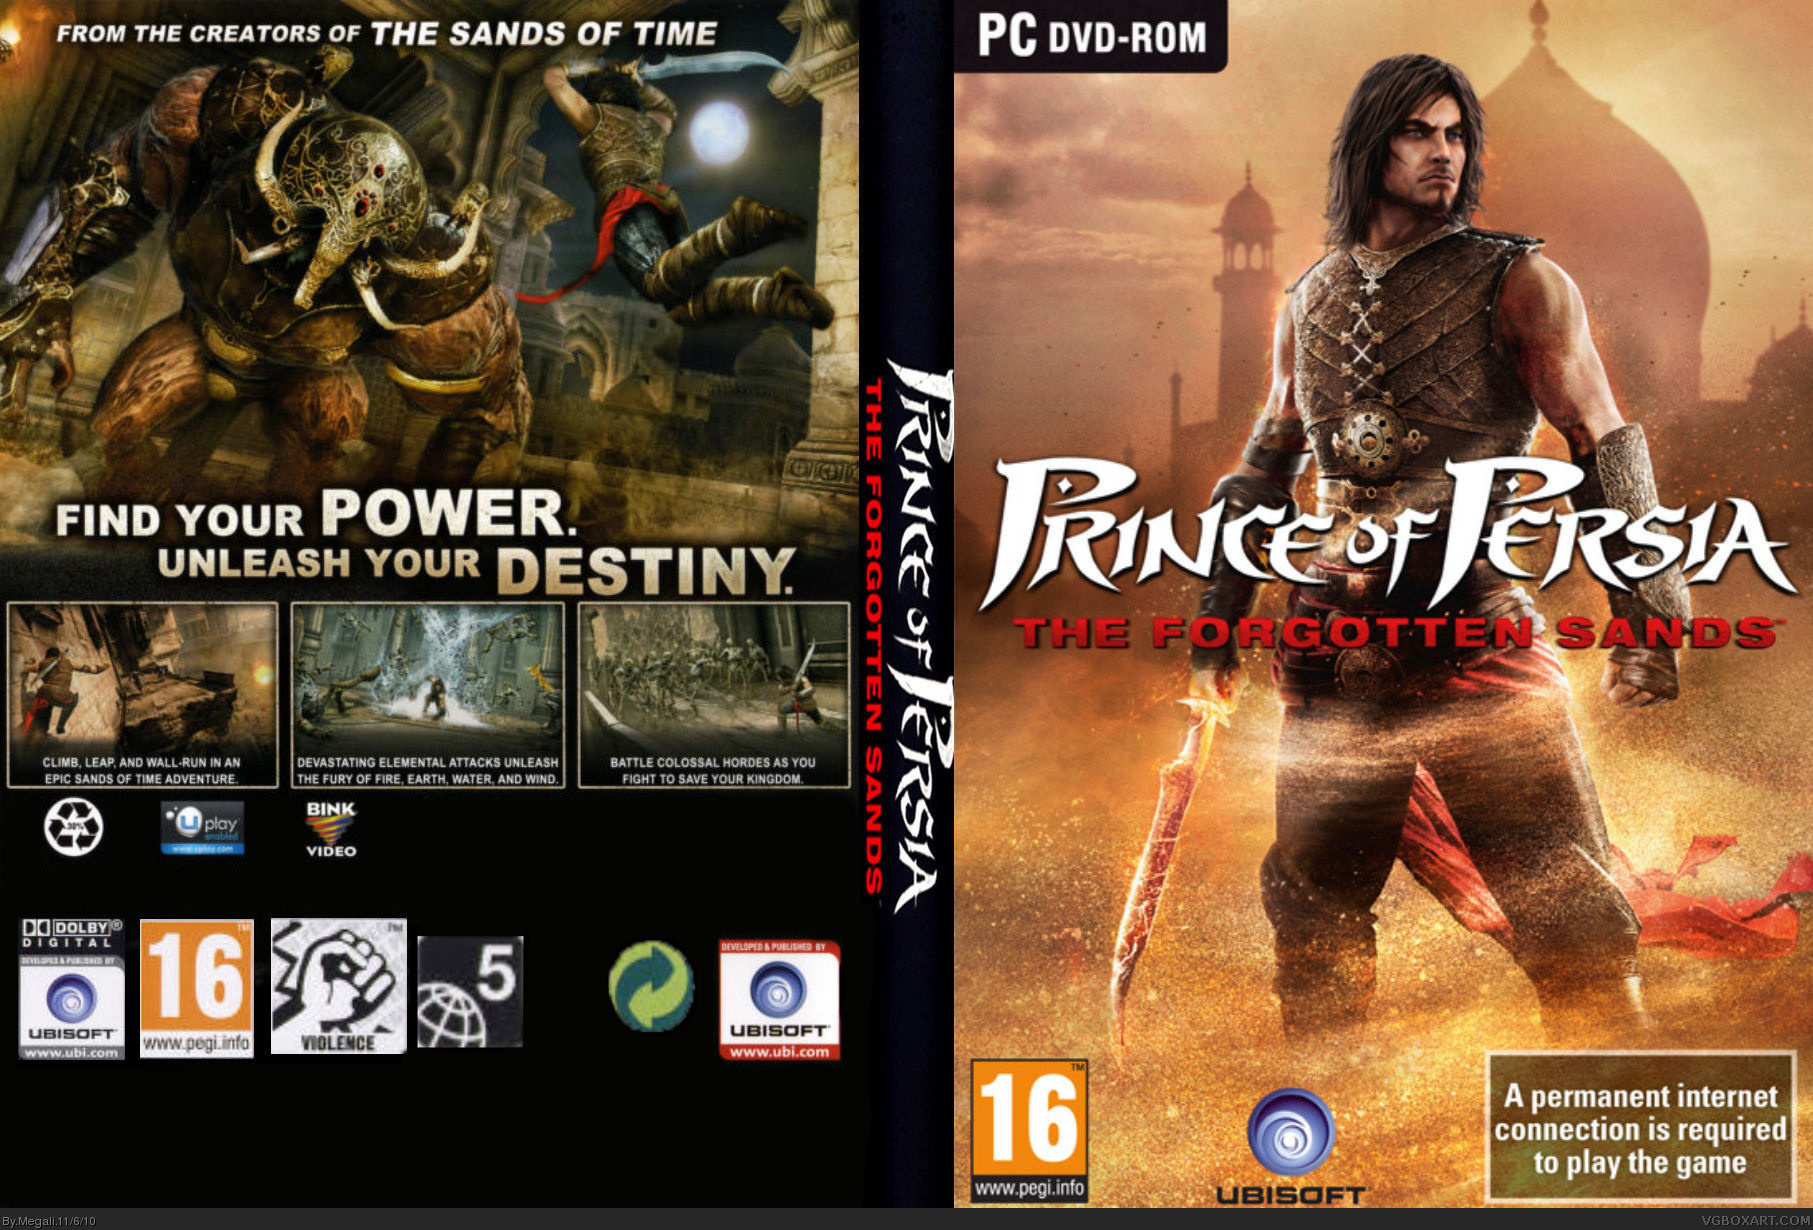 Prince of Persia - The Forgotten Sands box cover